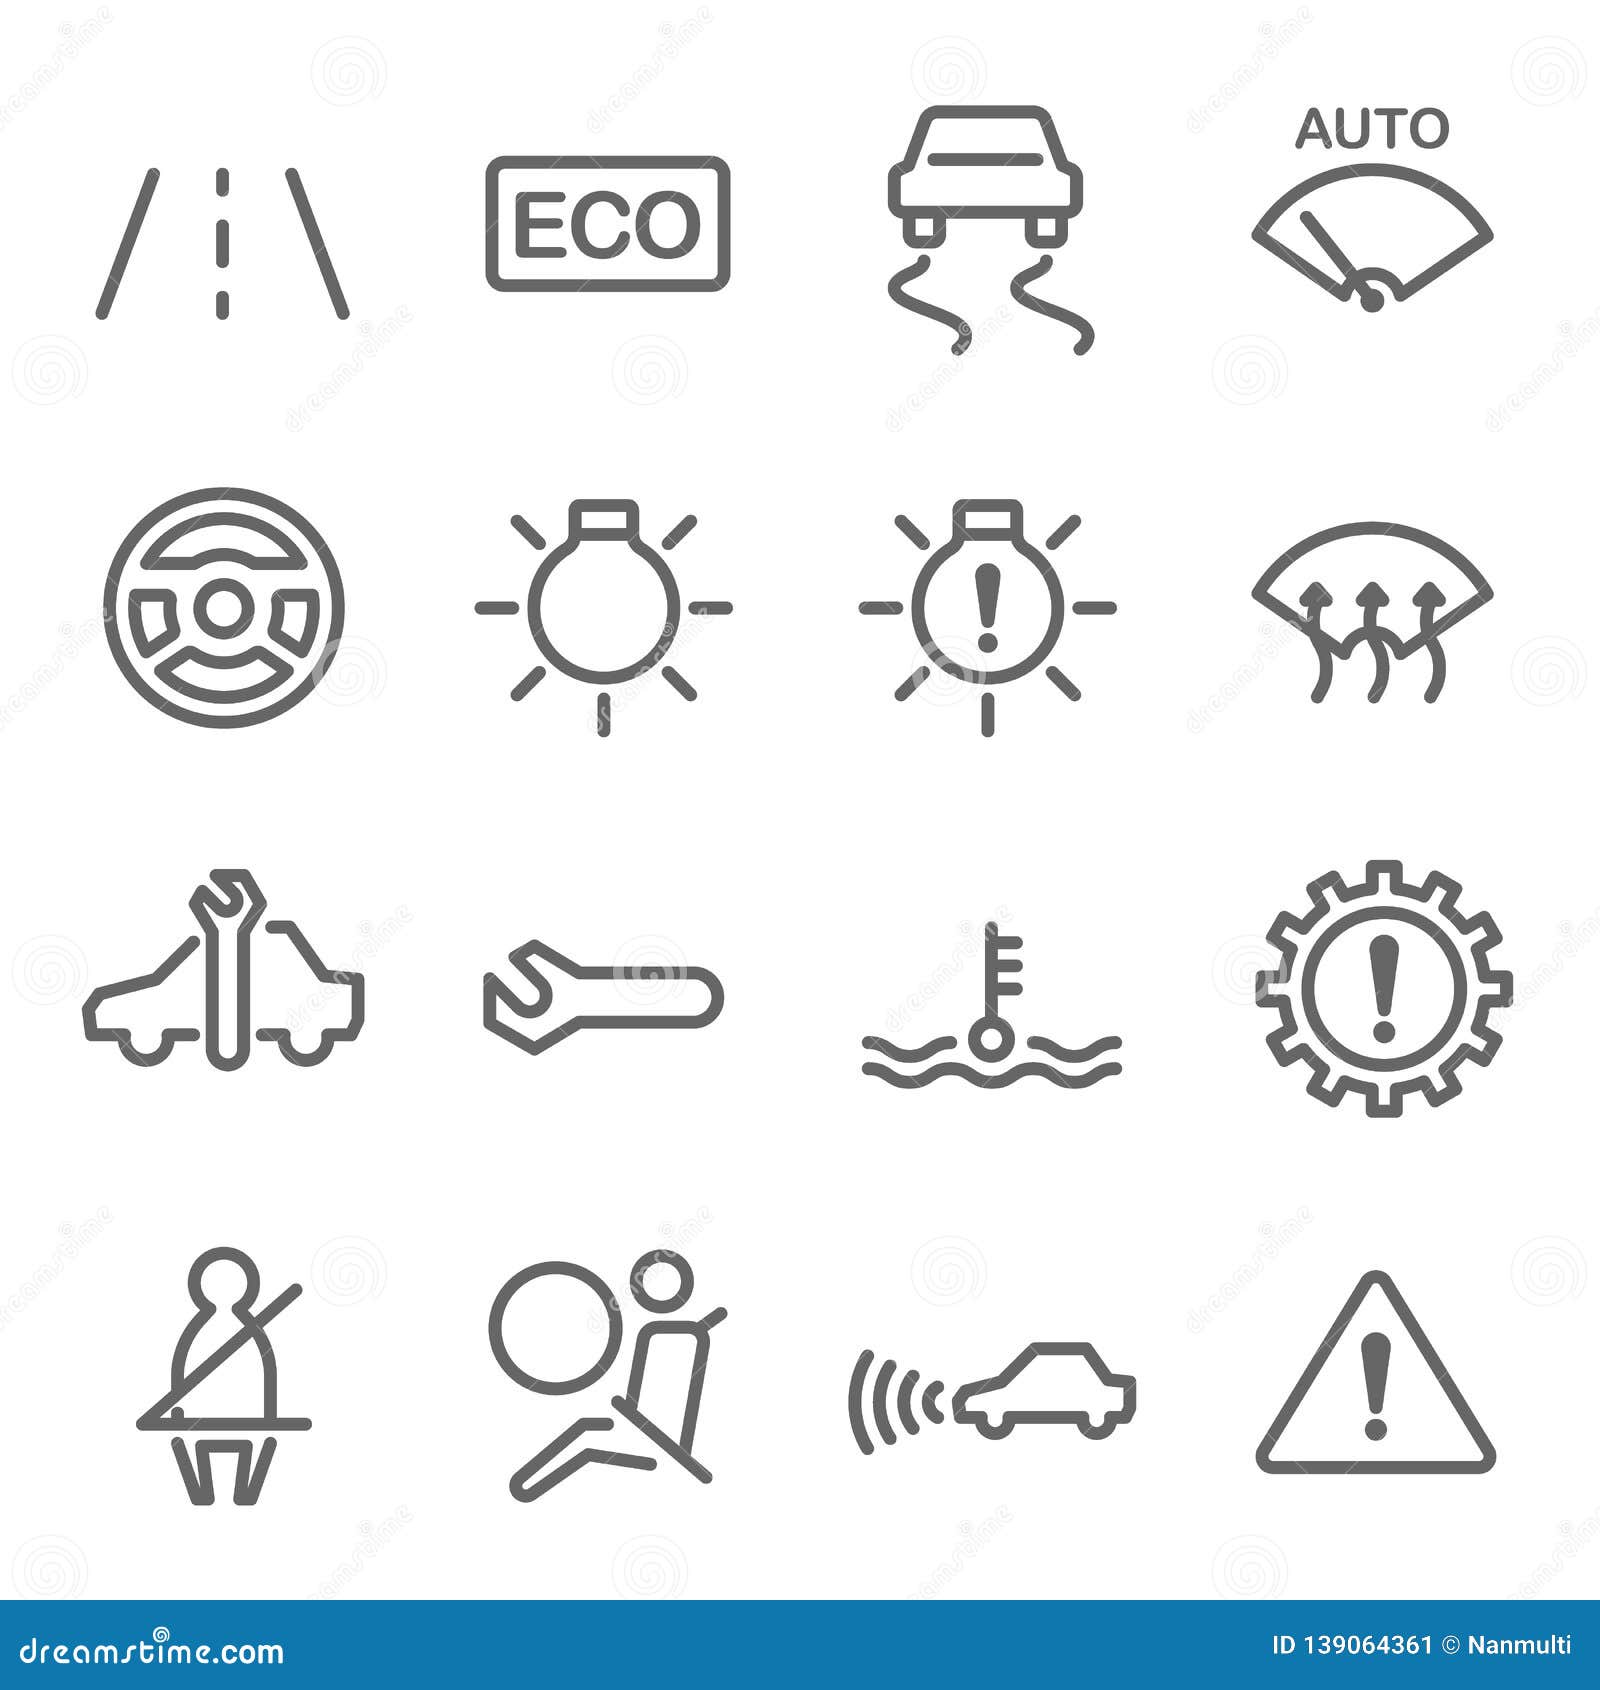 car dashboard  line icon set. contains such icons as seatbelt, steering wheel, gear, eco, electronic stability programme and